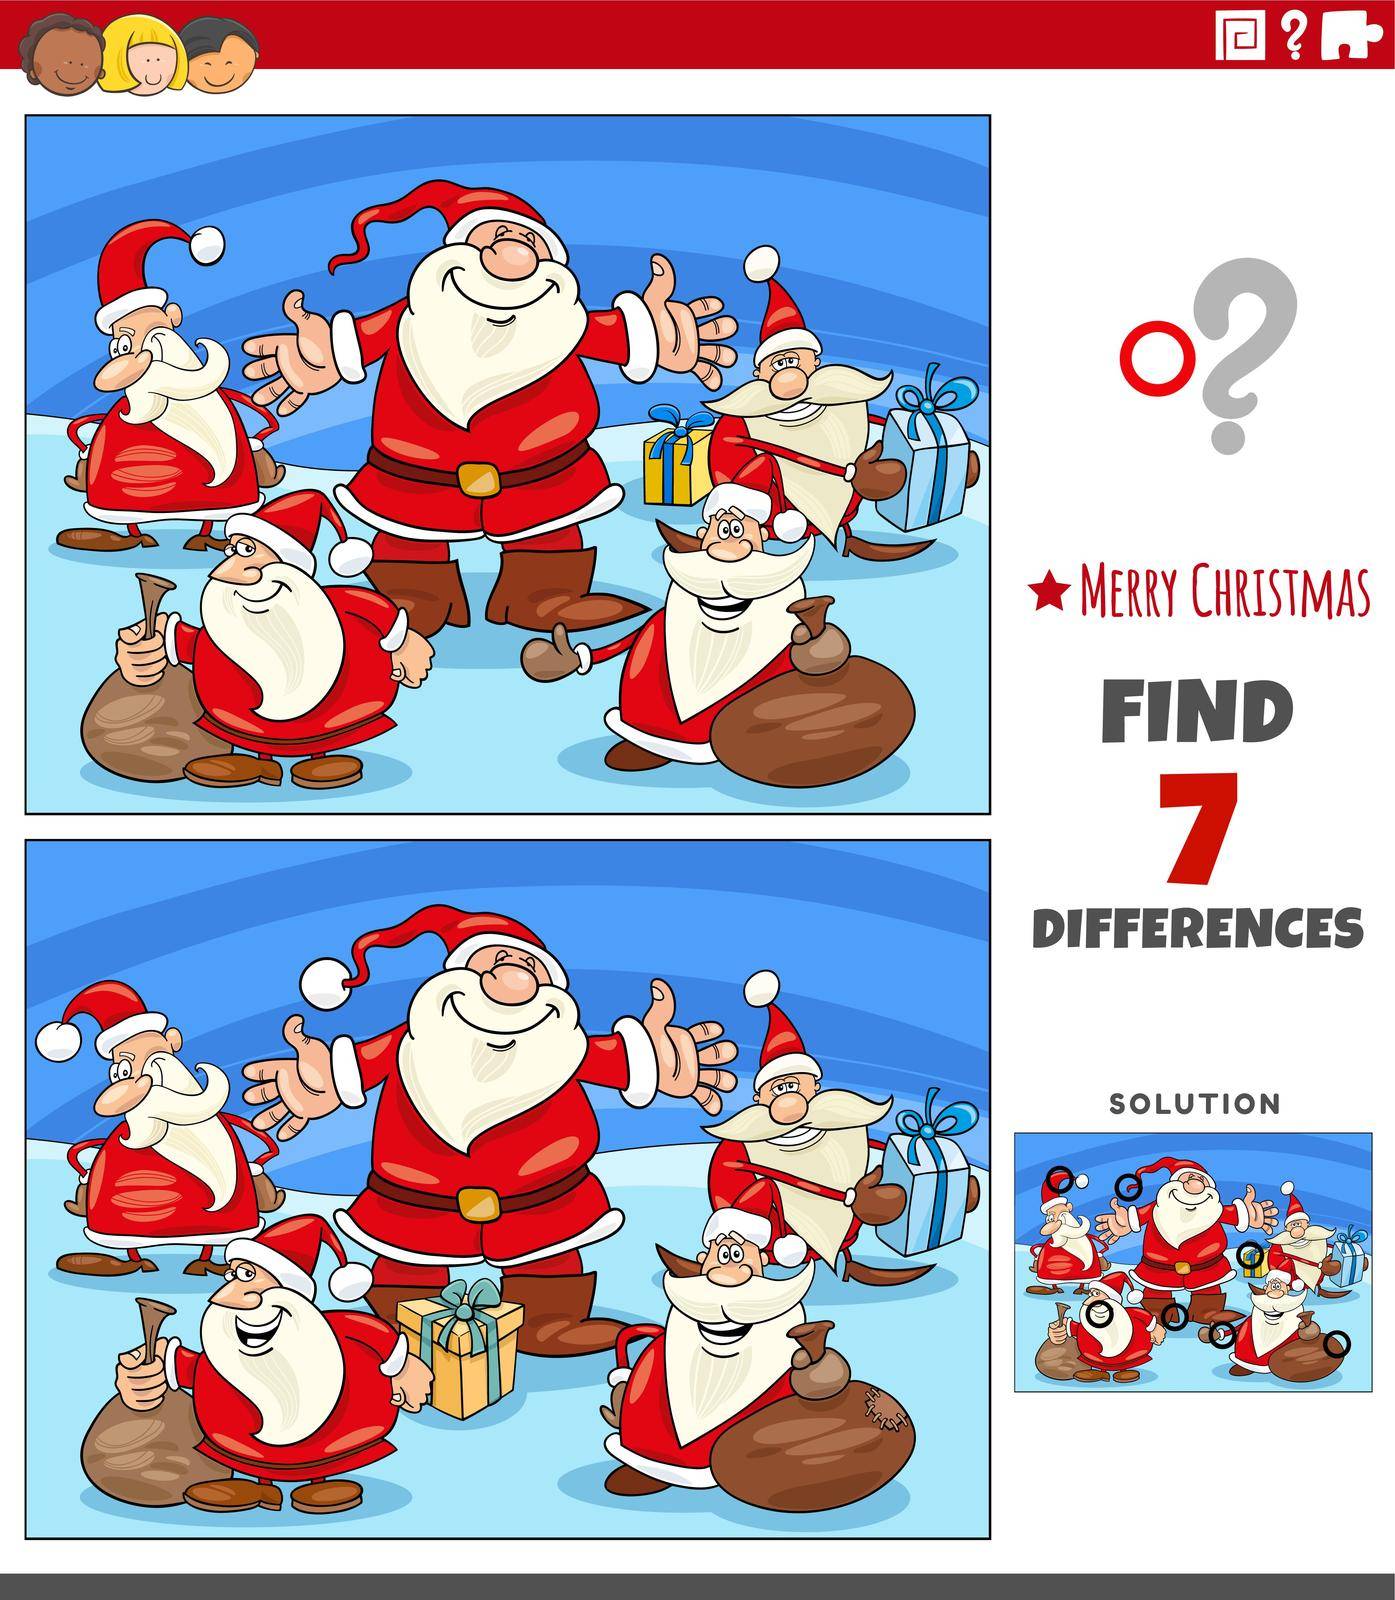 differences game for kids with Santa Claus characters by izakowski